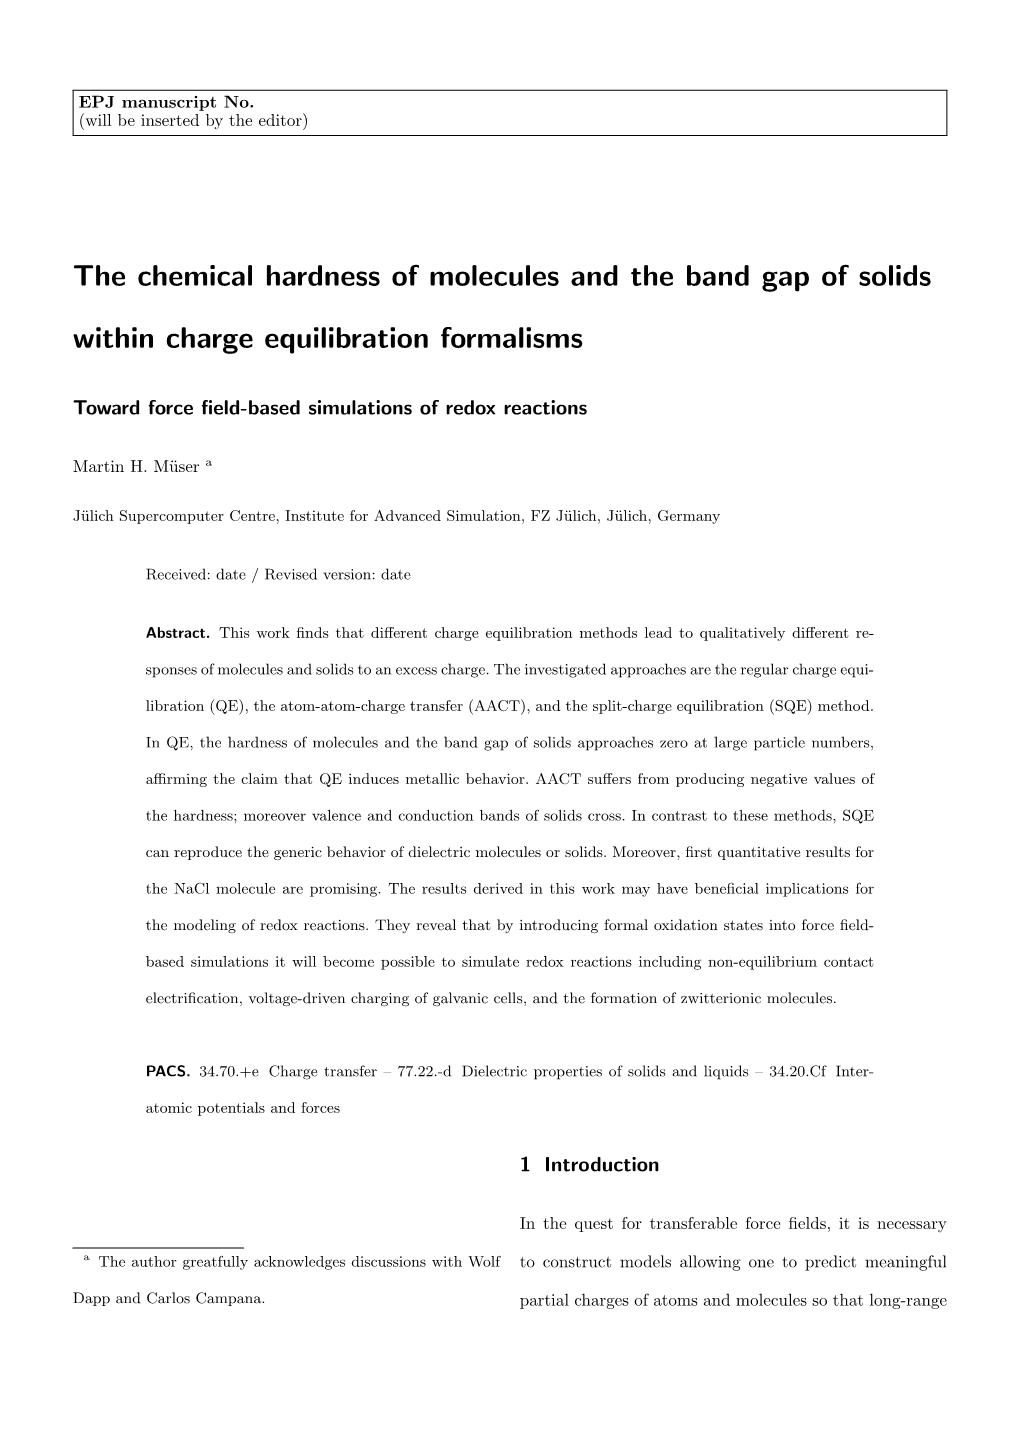 The Chemical Hardness of Molecules and the Band Gap of Solids Within Charge Equilibration Formalisms